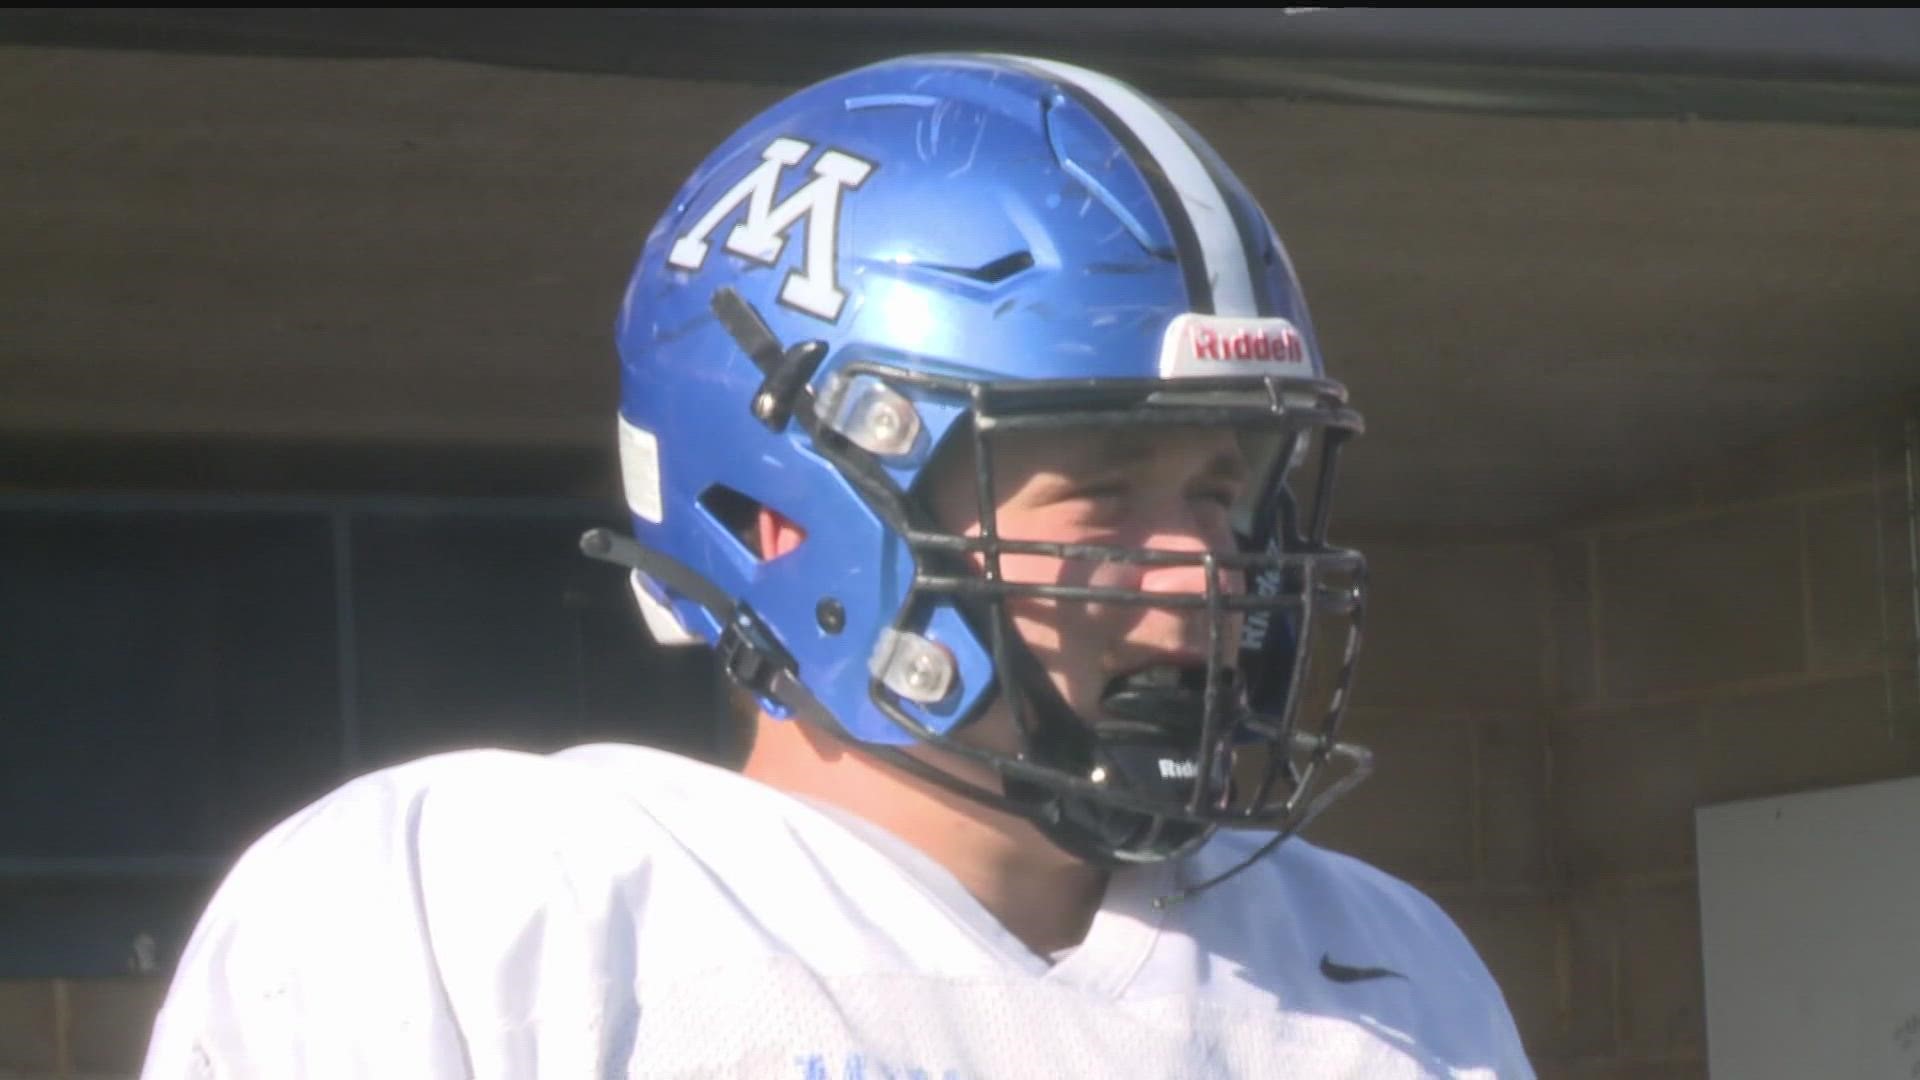 Jack Liwienski, son of former offensive guard Chris Liwienski, is headed to the next level after his time as starting center at Minnetonka.